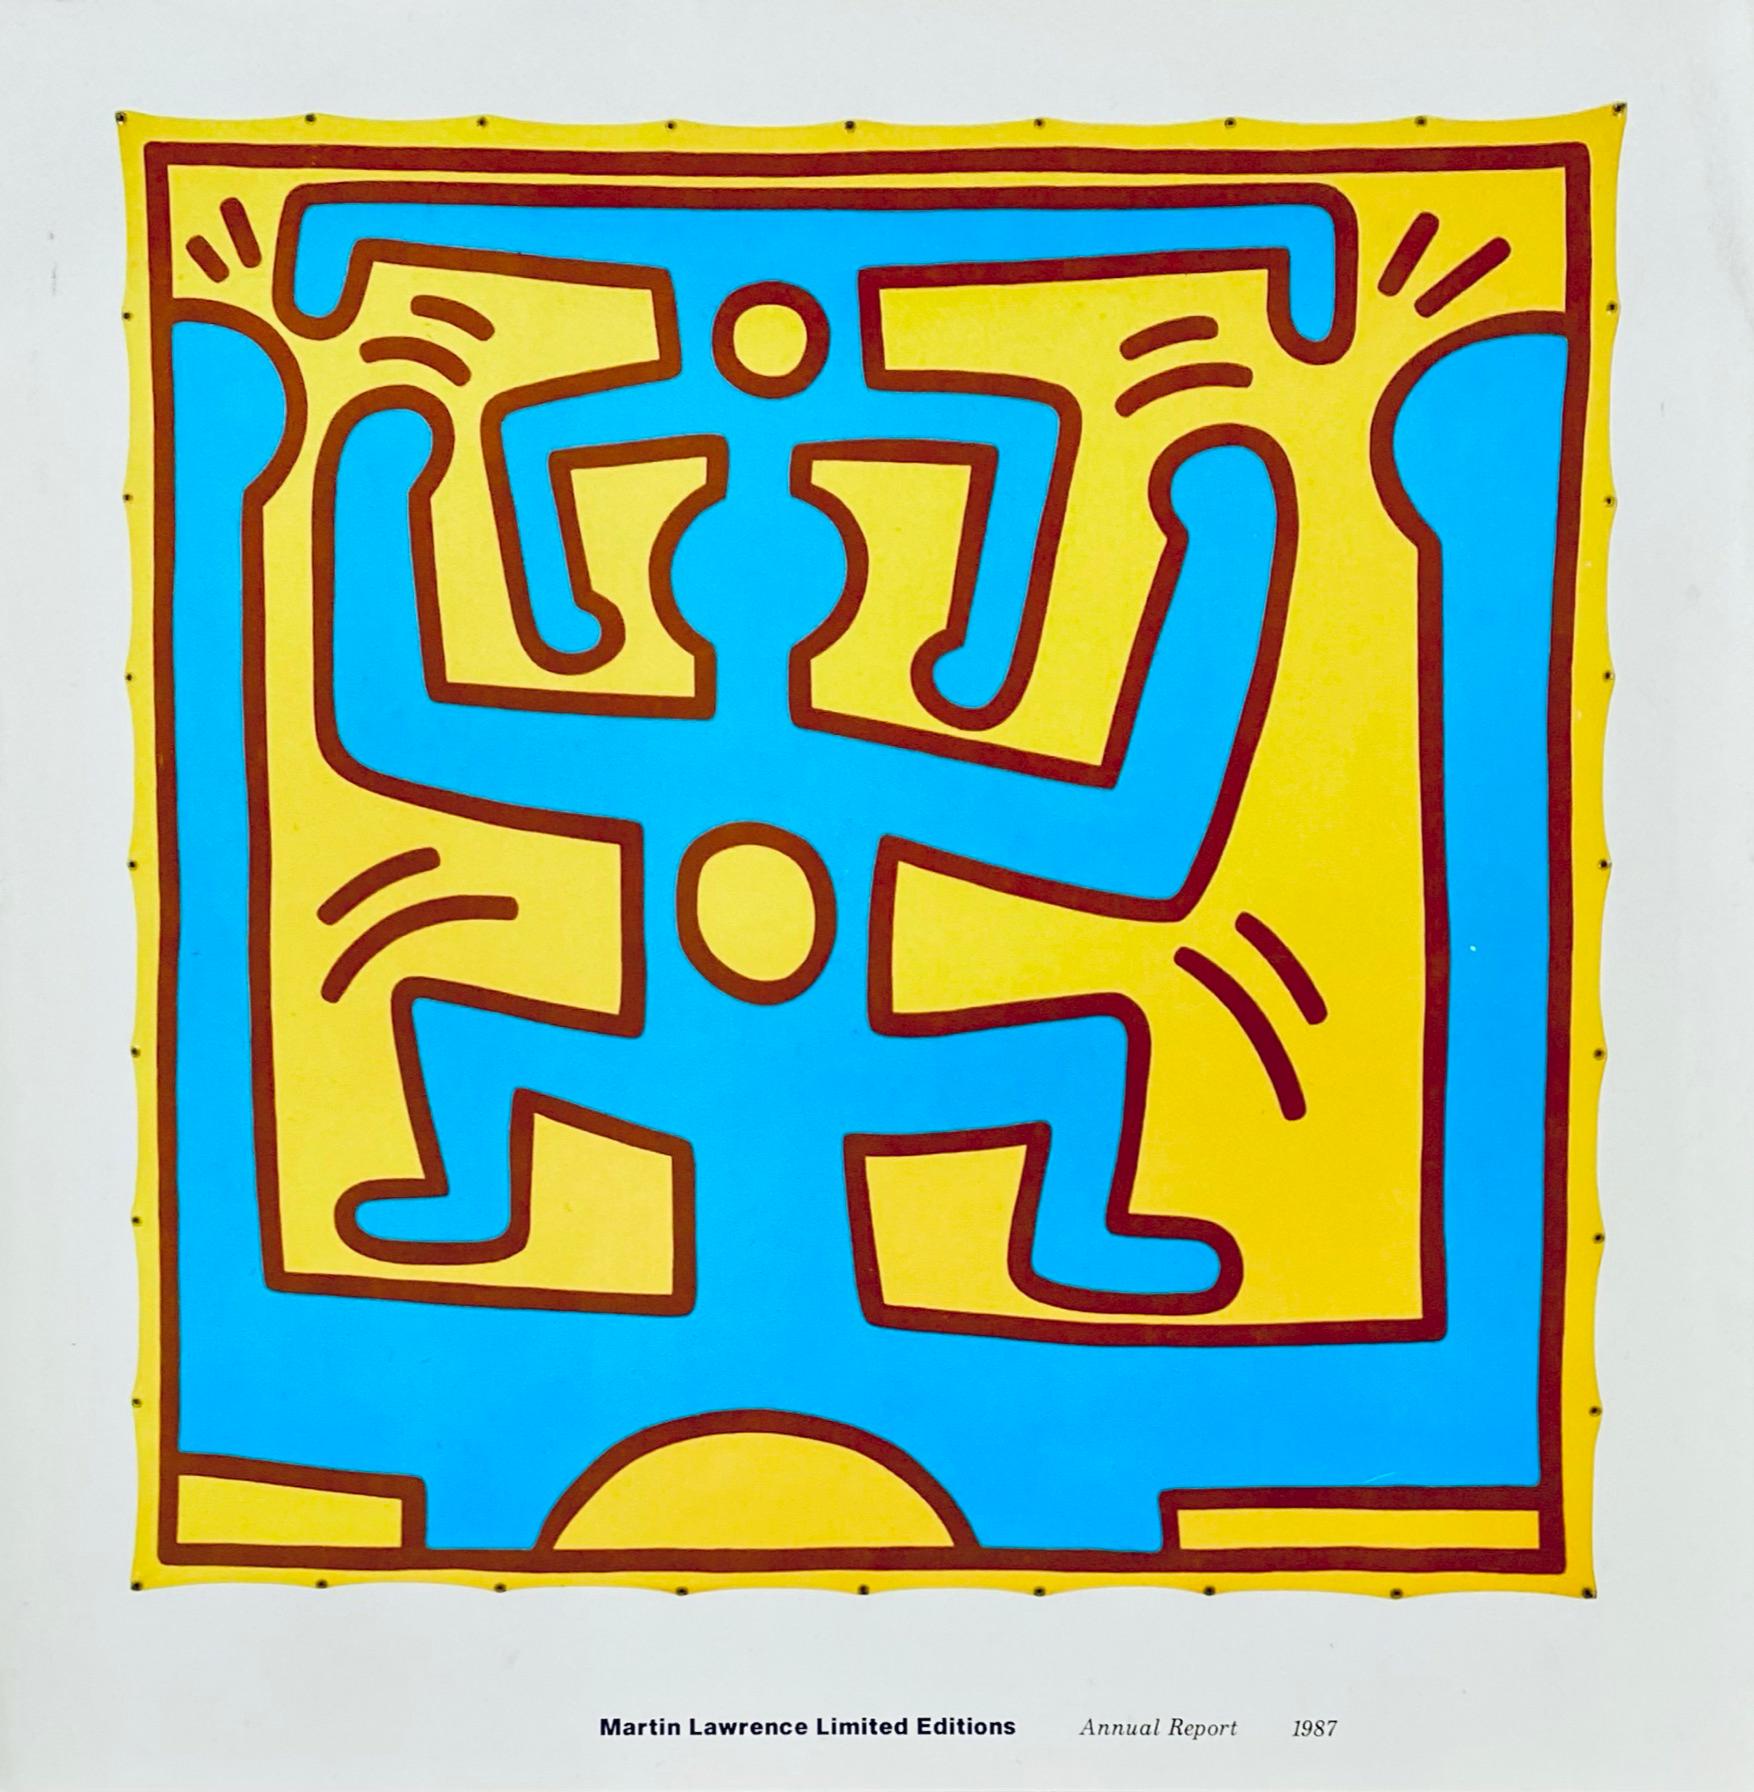 Hand Signed Keith Haring 1987 Martin Lawrence gallery annual report (Martin Lawrence Limited Editions): 

Medium: Spiral bound catalog. 
Approximately 12x12 inches folded closed. 
Very good overall vintage condition with a bold, well-preserved black